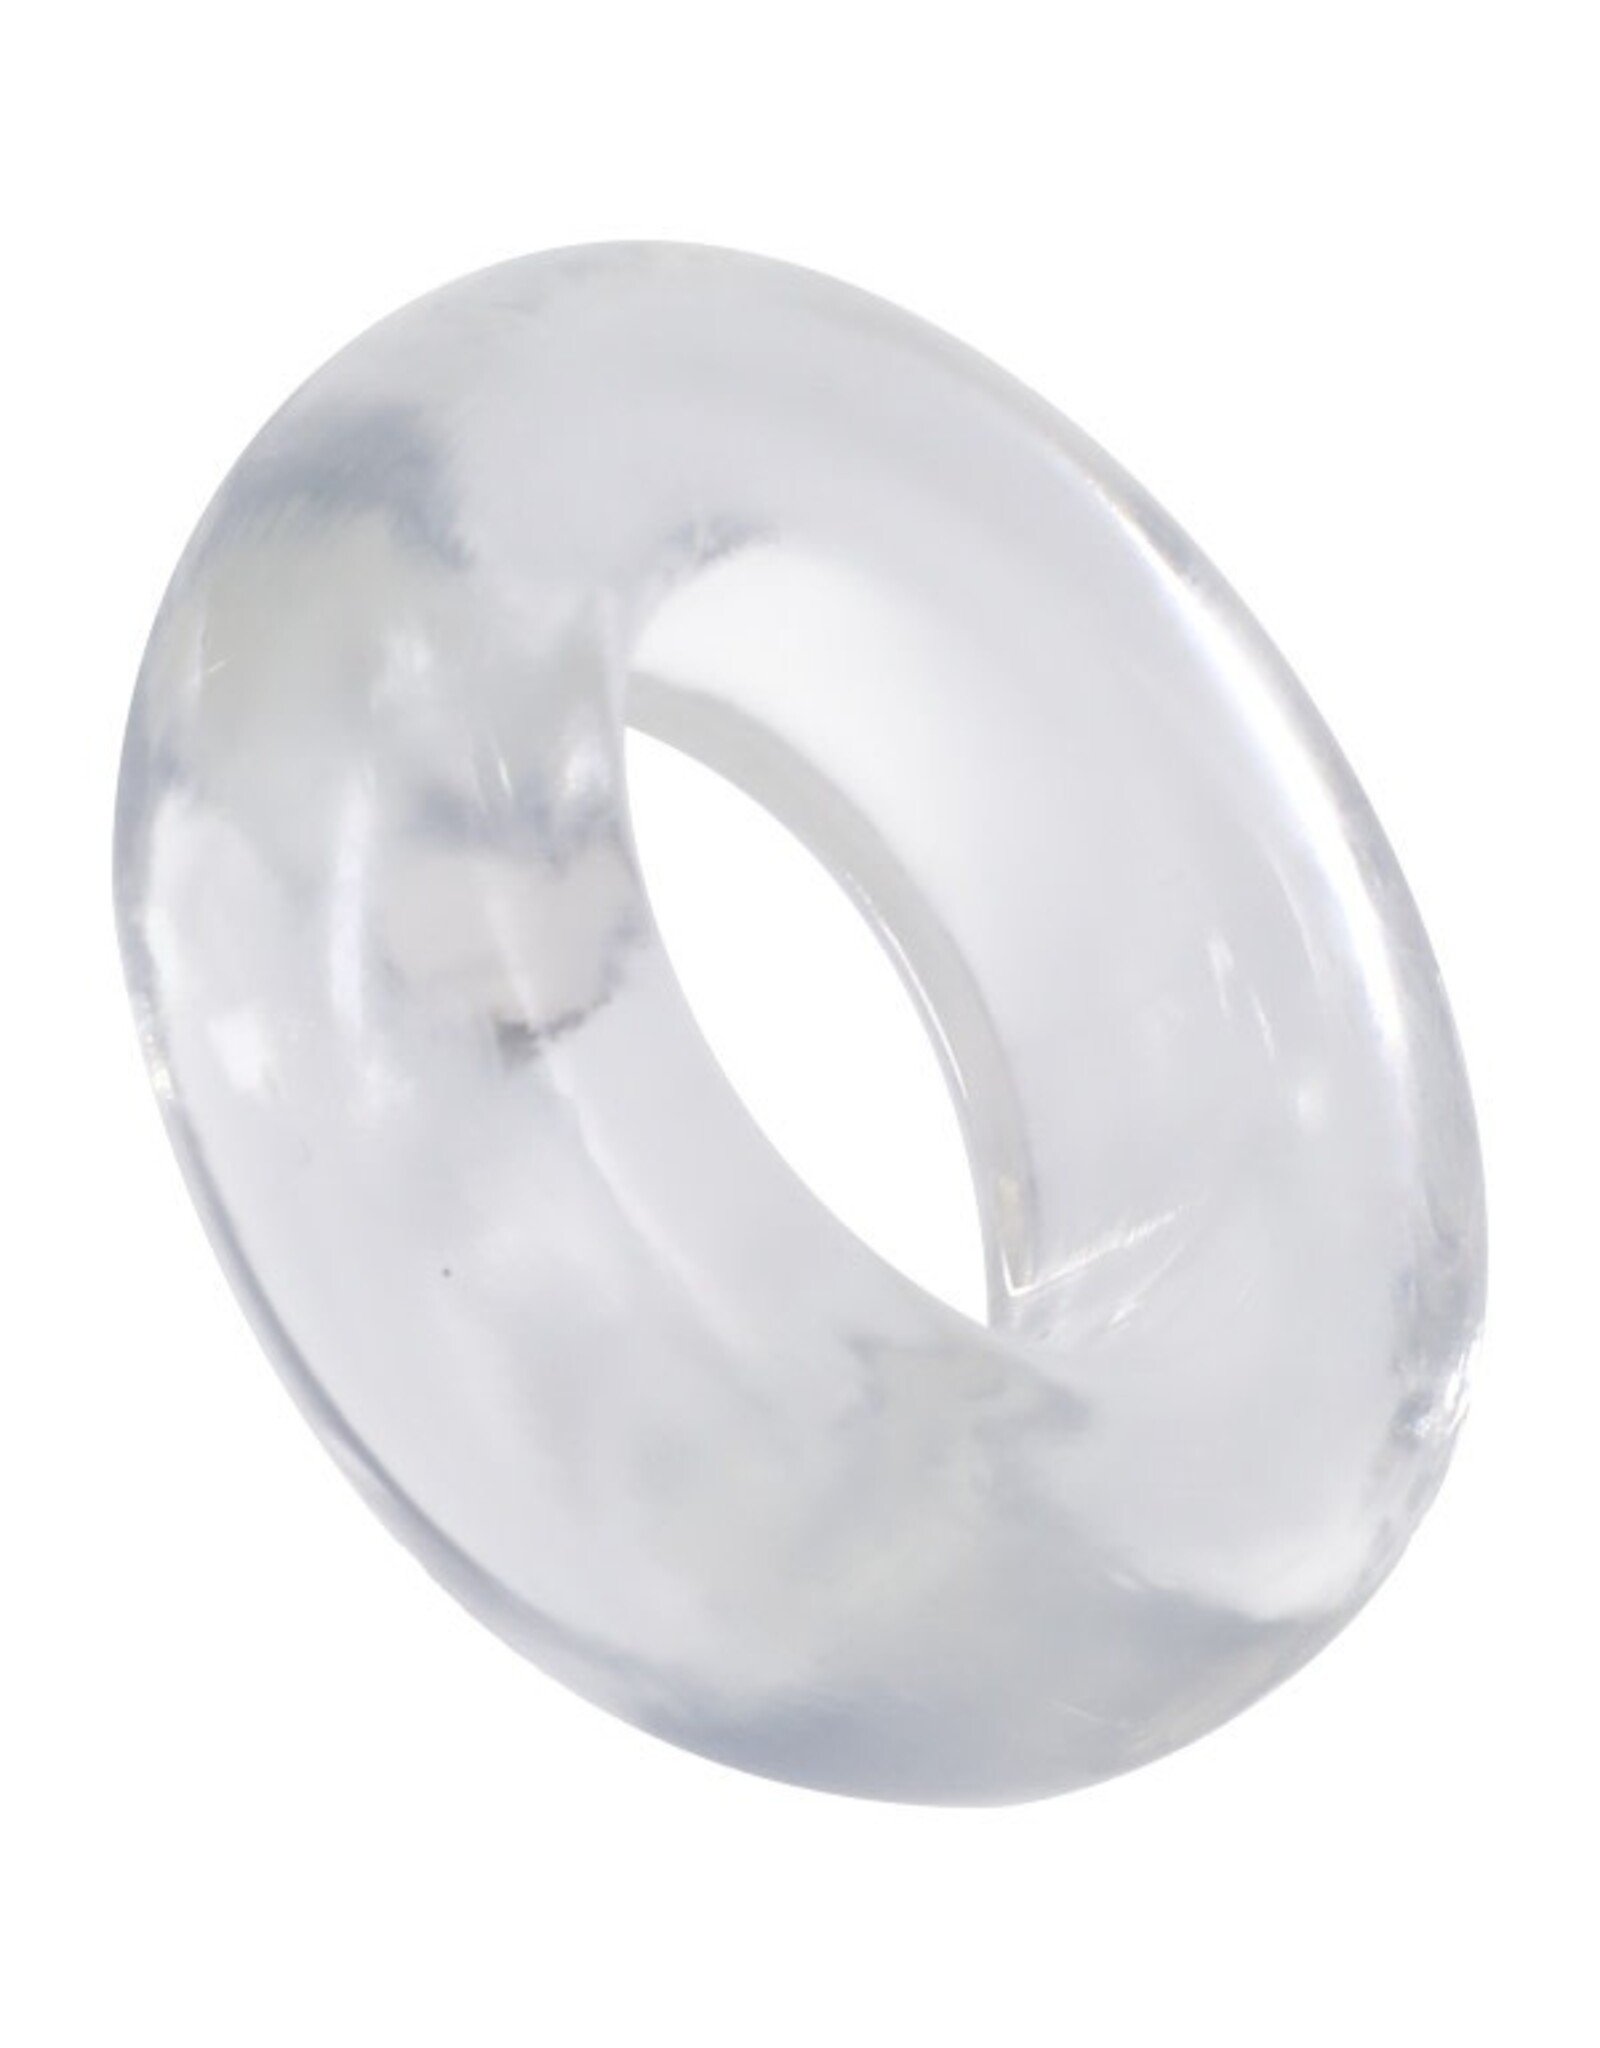 Doc Johnson Rock Solid - The Donut 4x - Clear